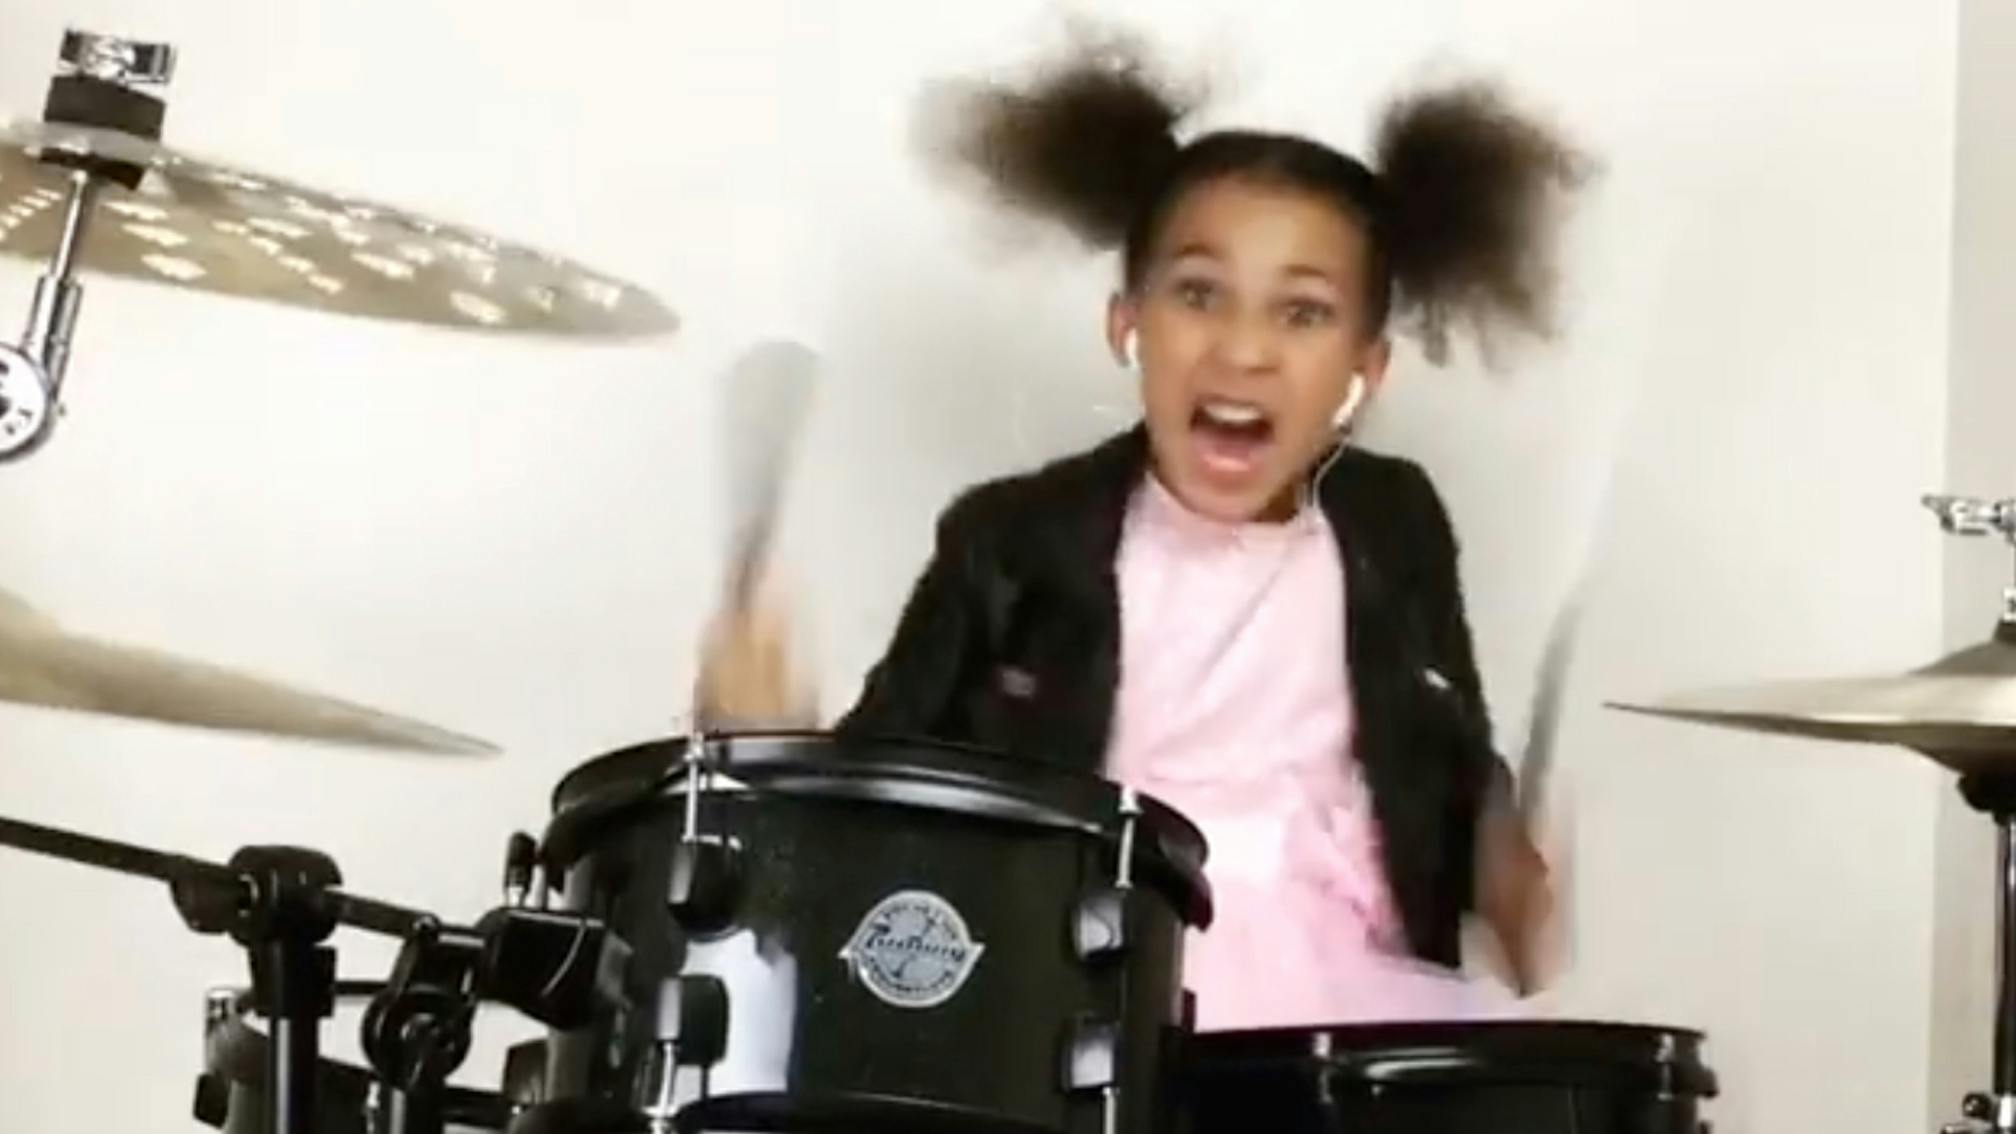 Watch This Nine-Year-Old Crush It Drumming To Chop Suey!